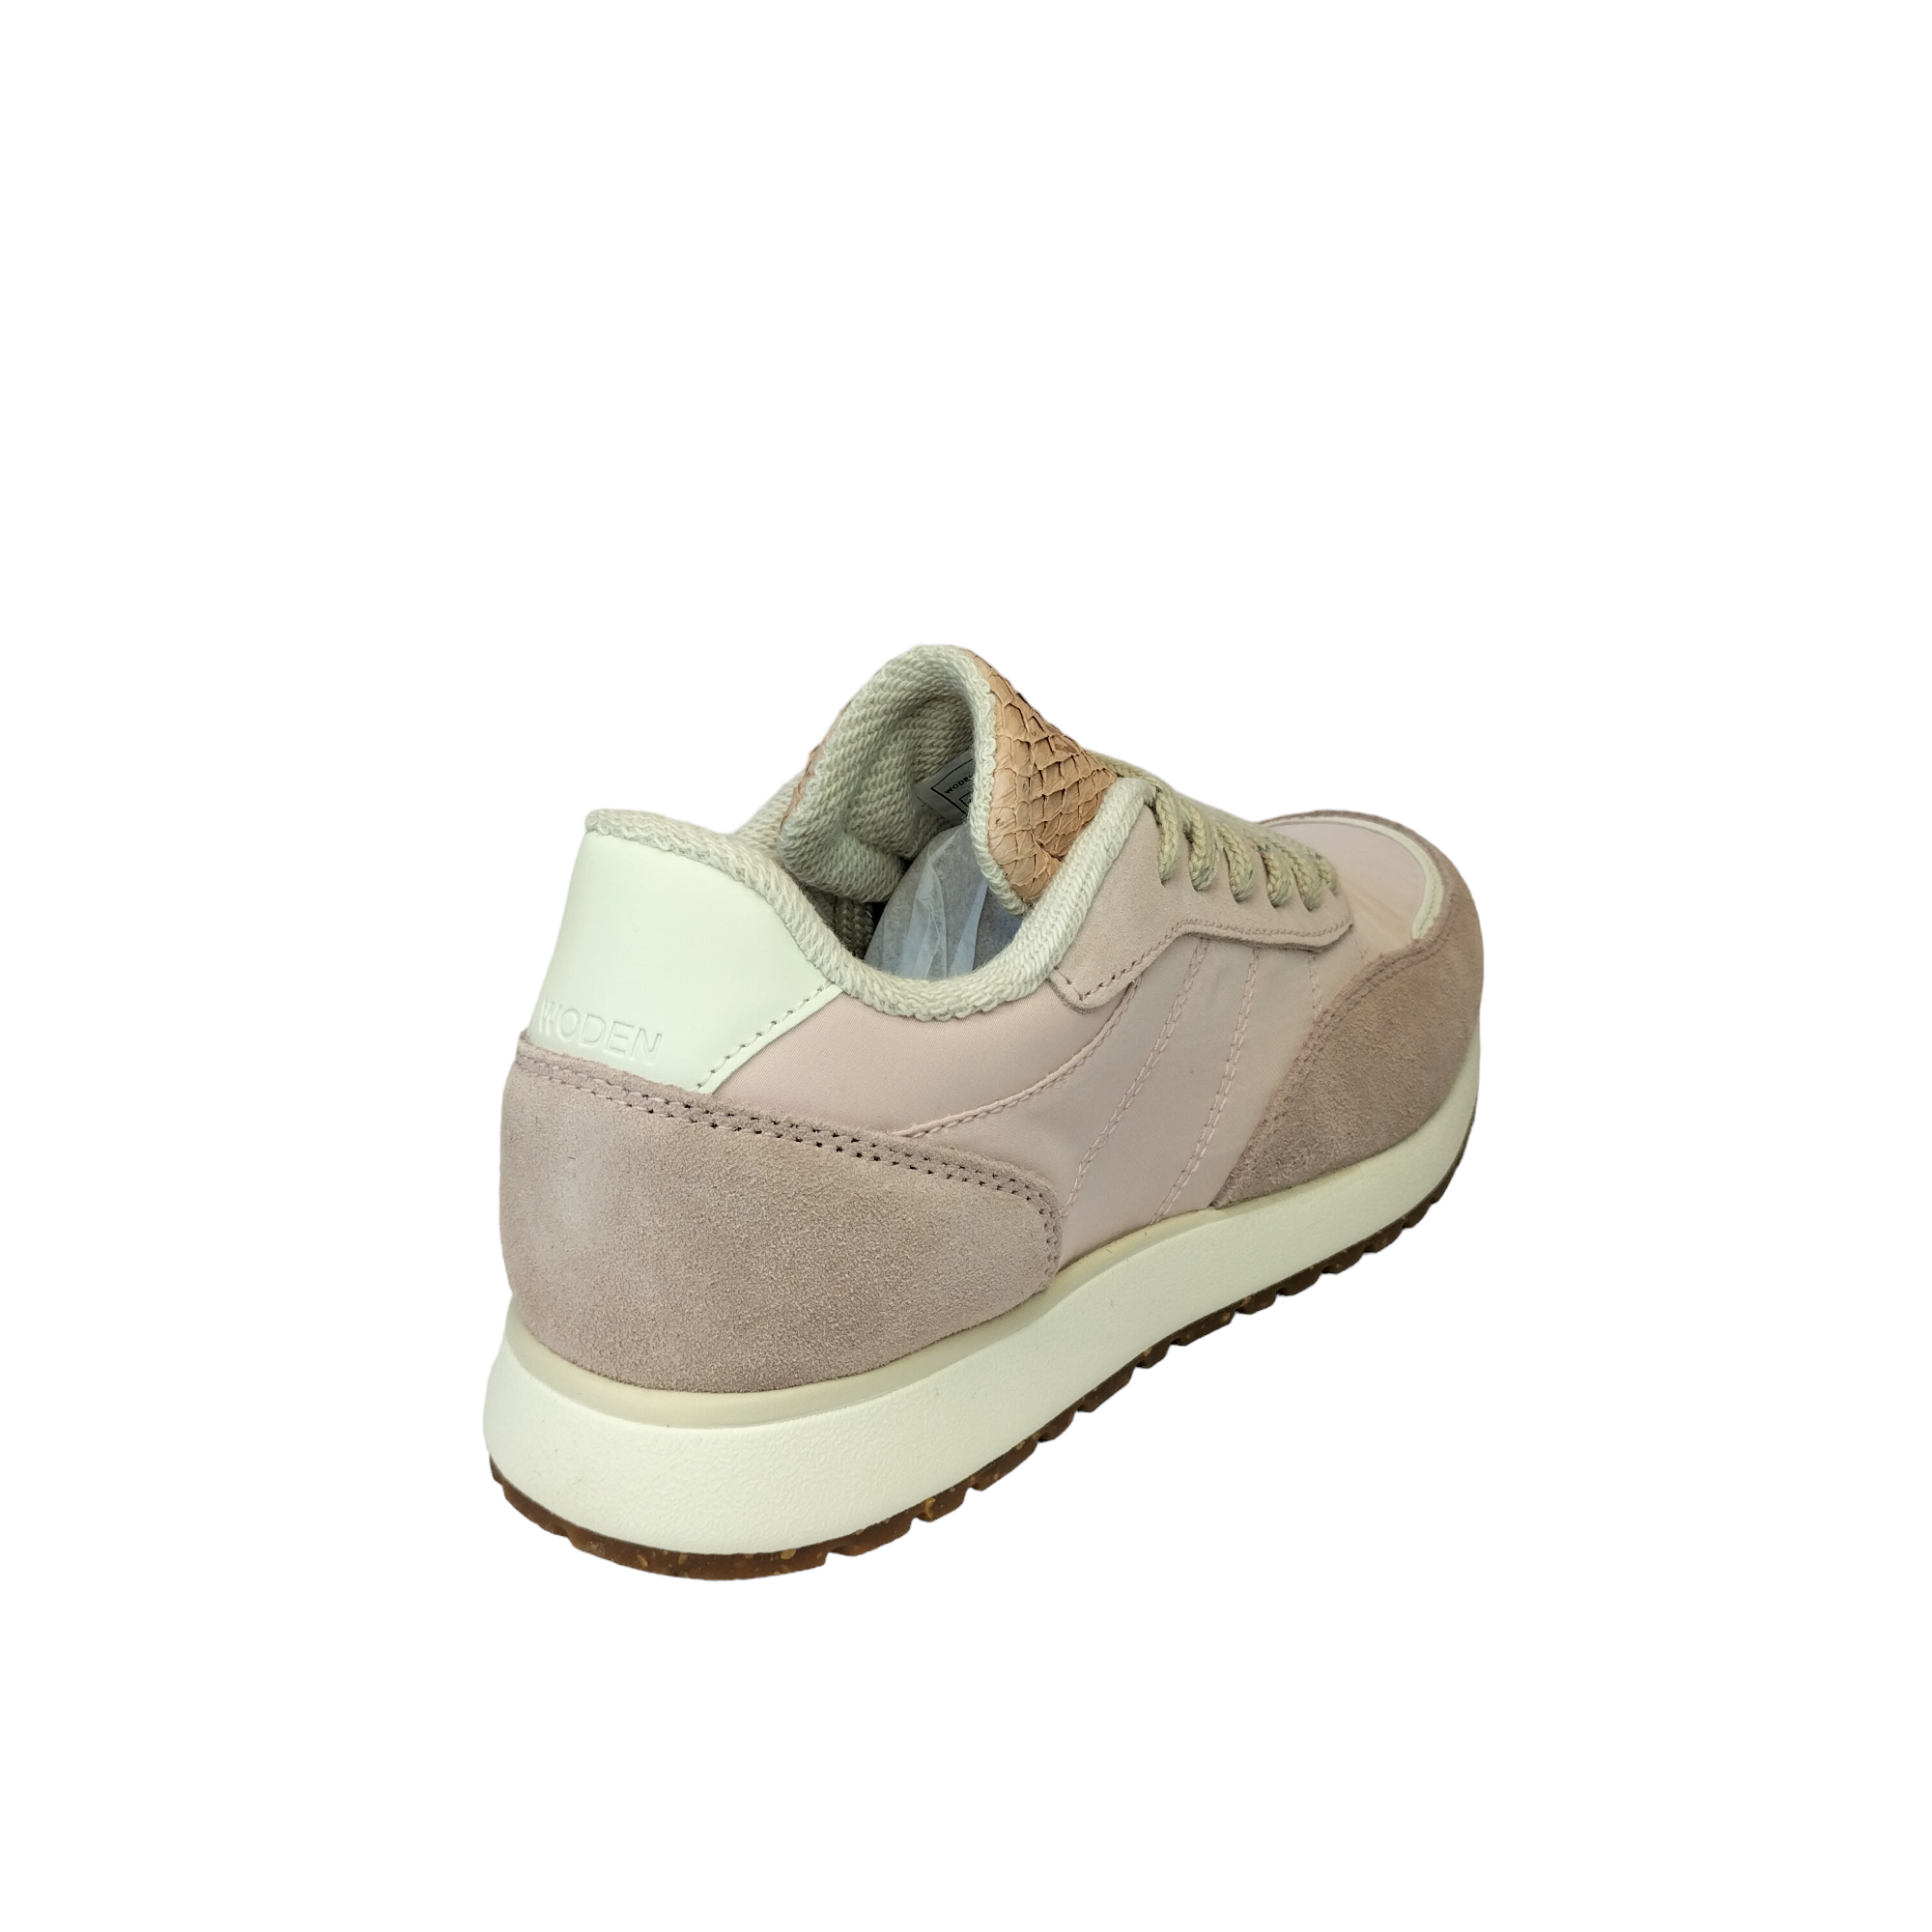 Nellie Soft Reflective - shoe&amp;me - Woden - Sneaker - Eco Collection, Sneaker, Summer, Winter, Womens